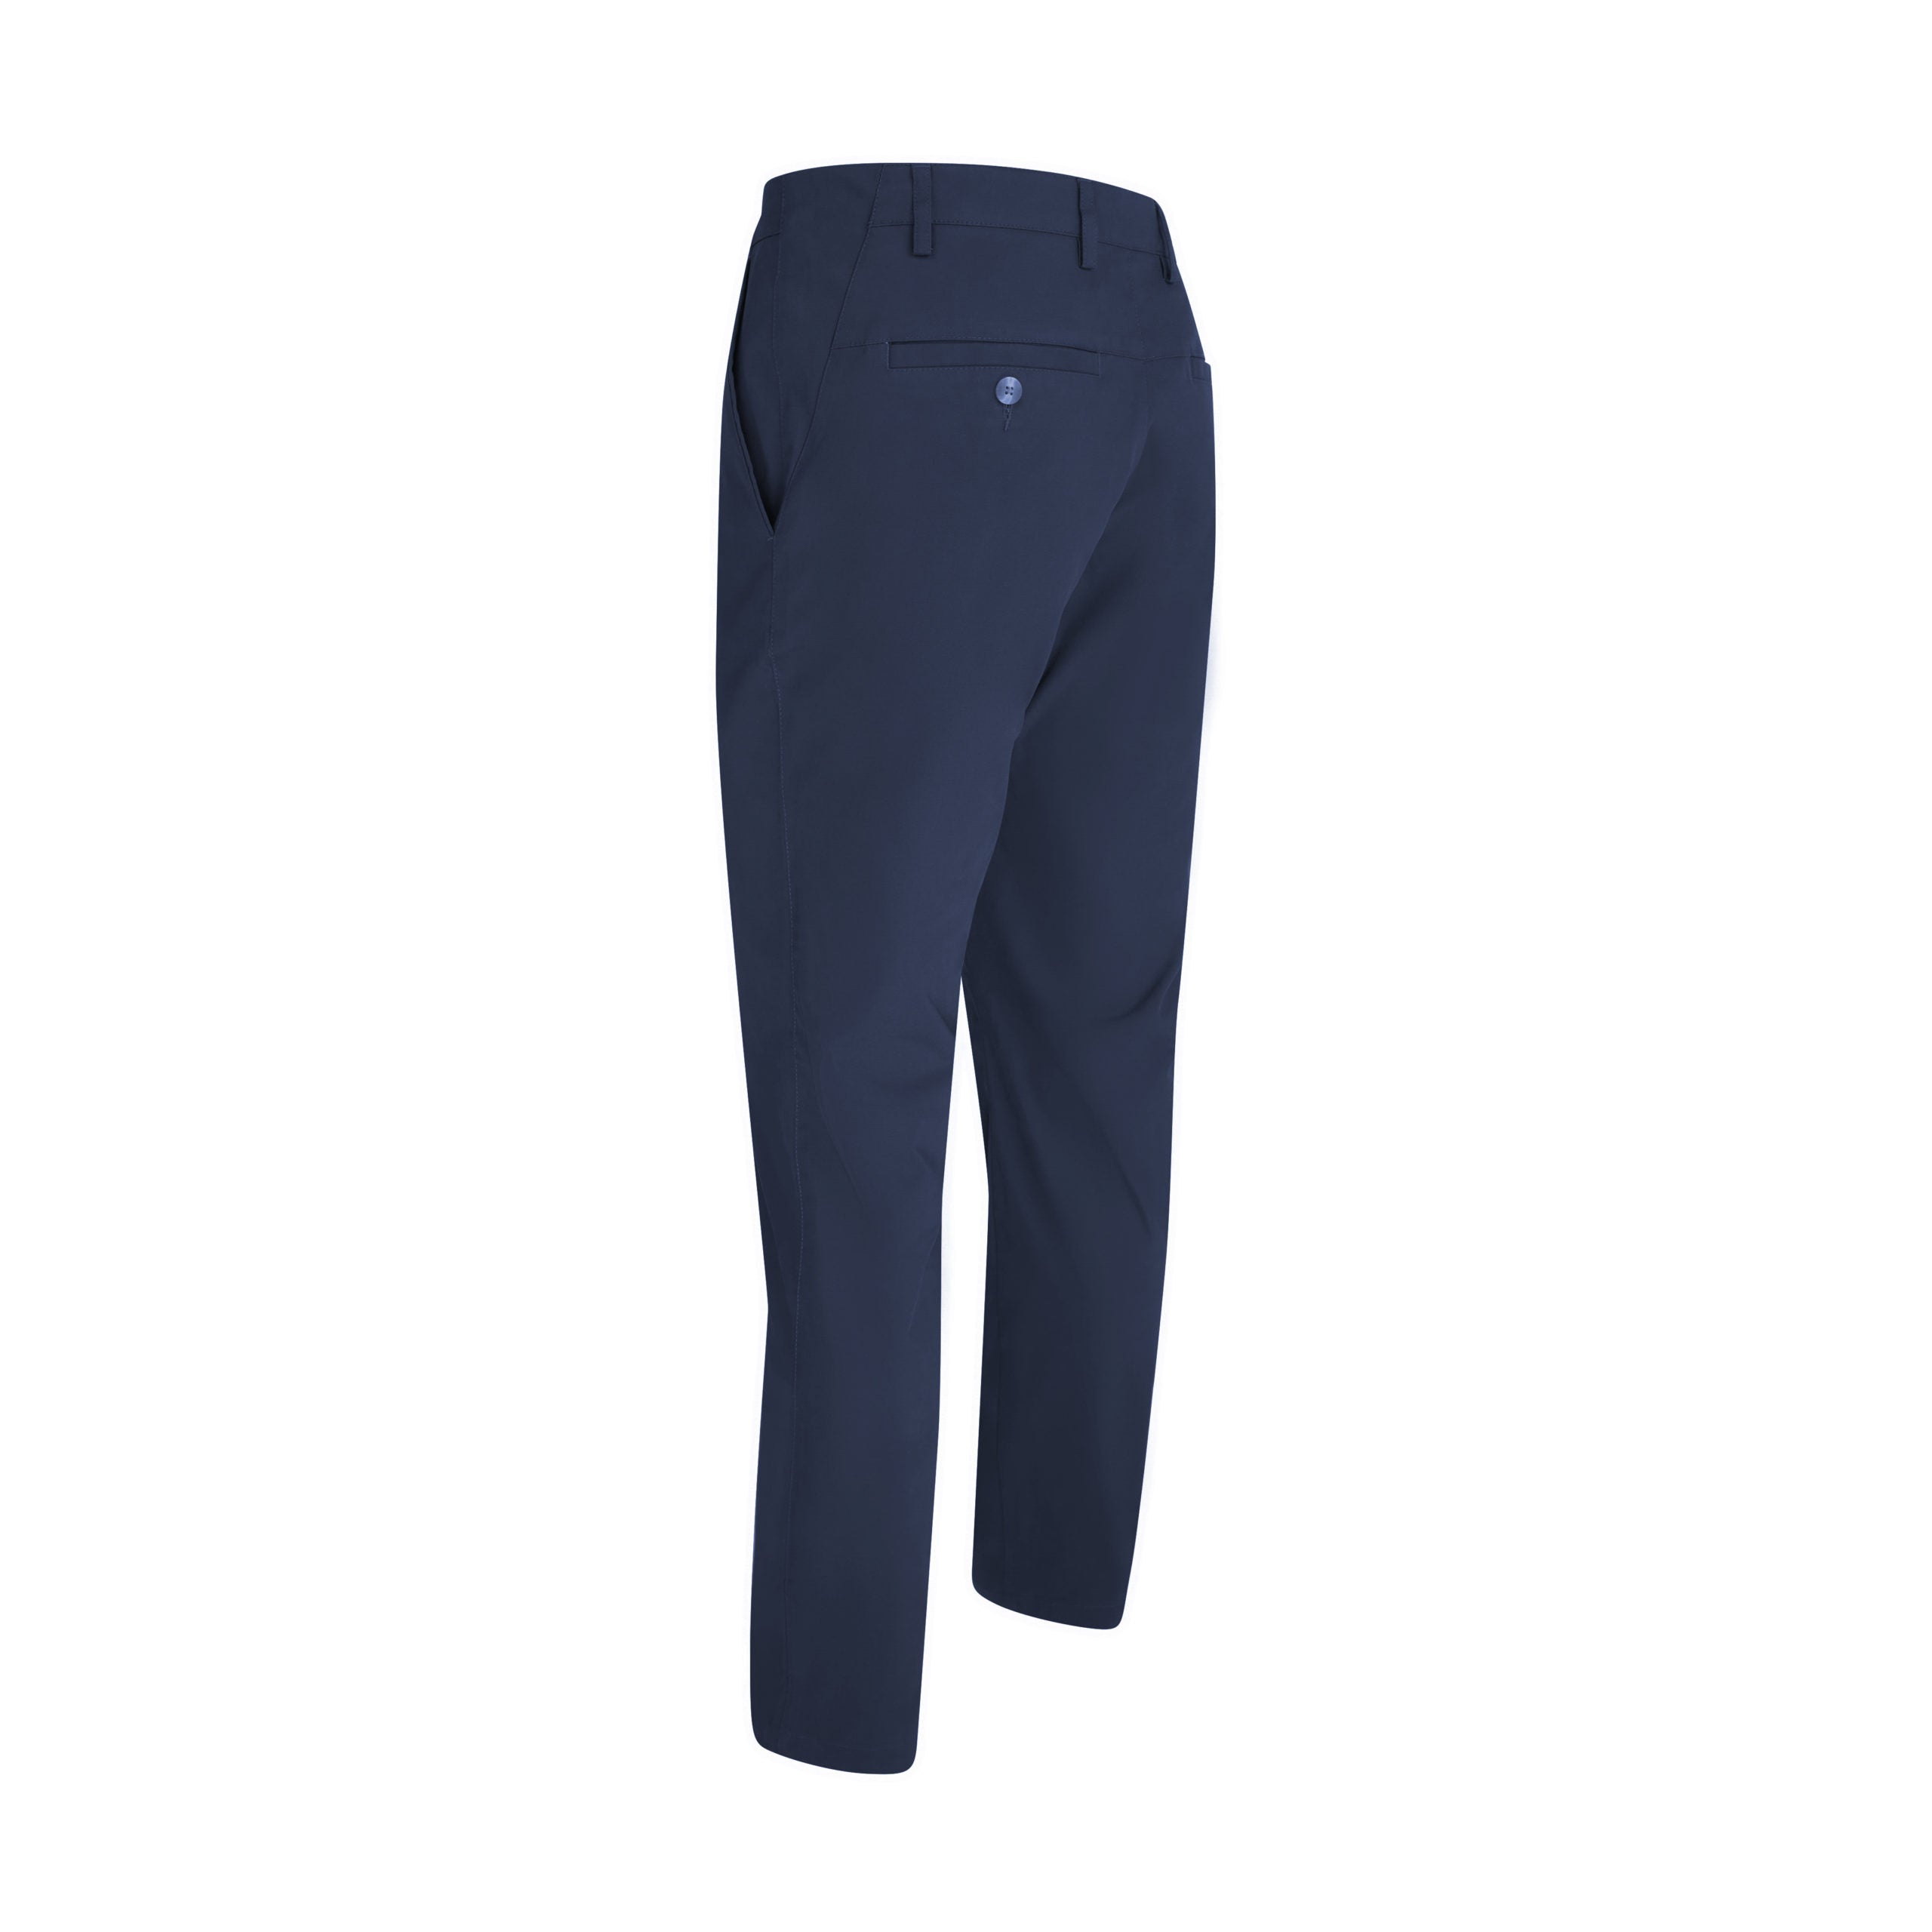 Flat Fronted Trouser Navy